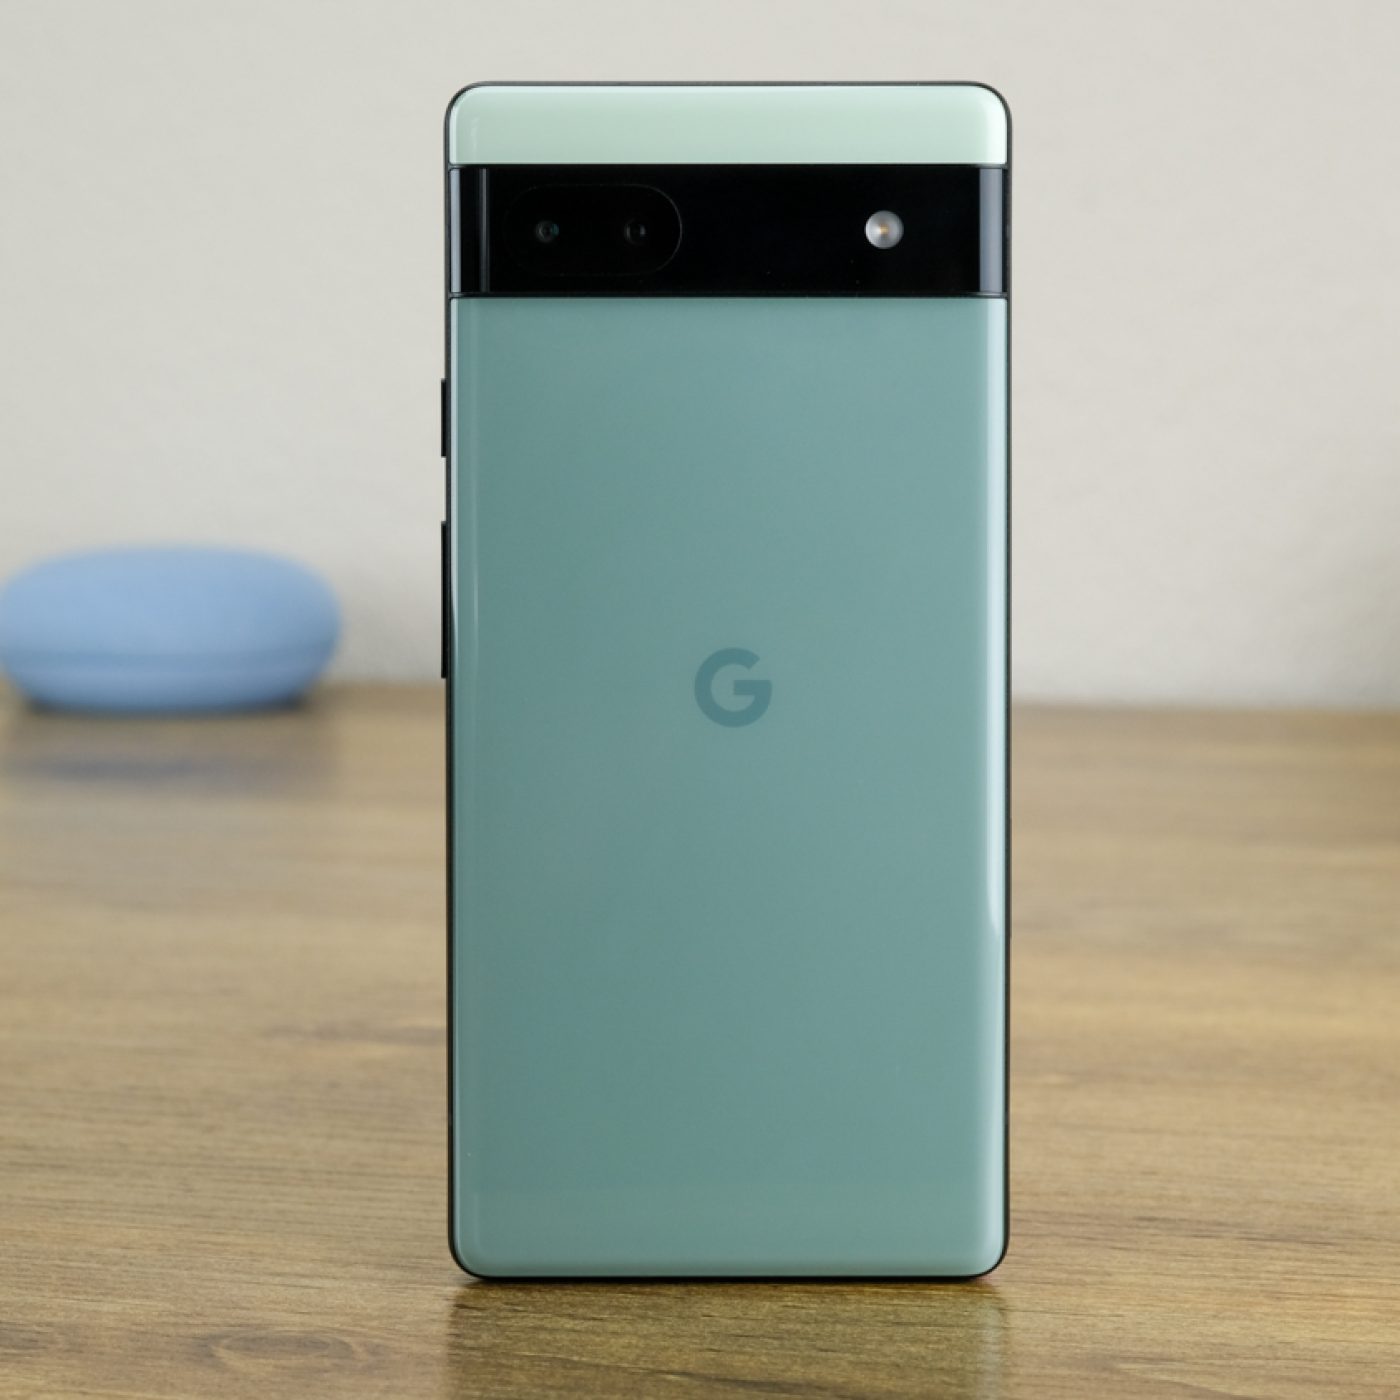 Pixel 6a Review Camera Quality Price Look of Pixel 6a Mid range Smartphone